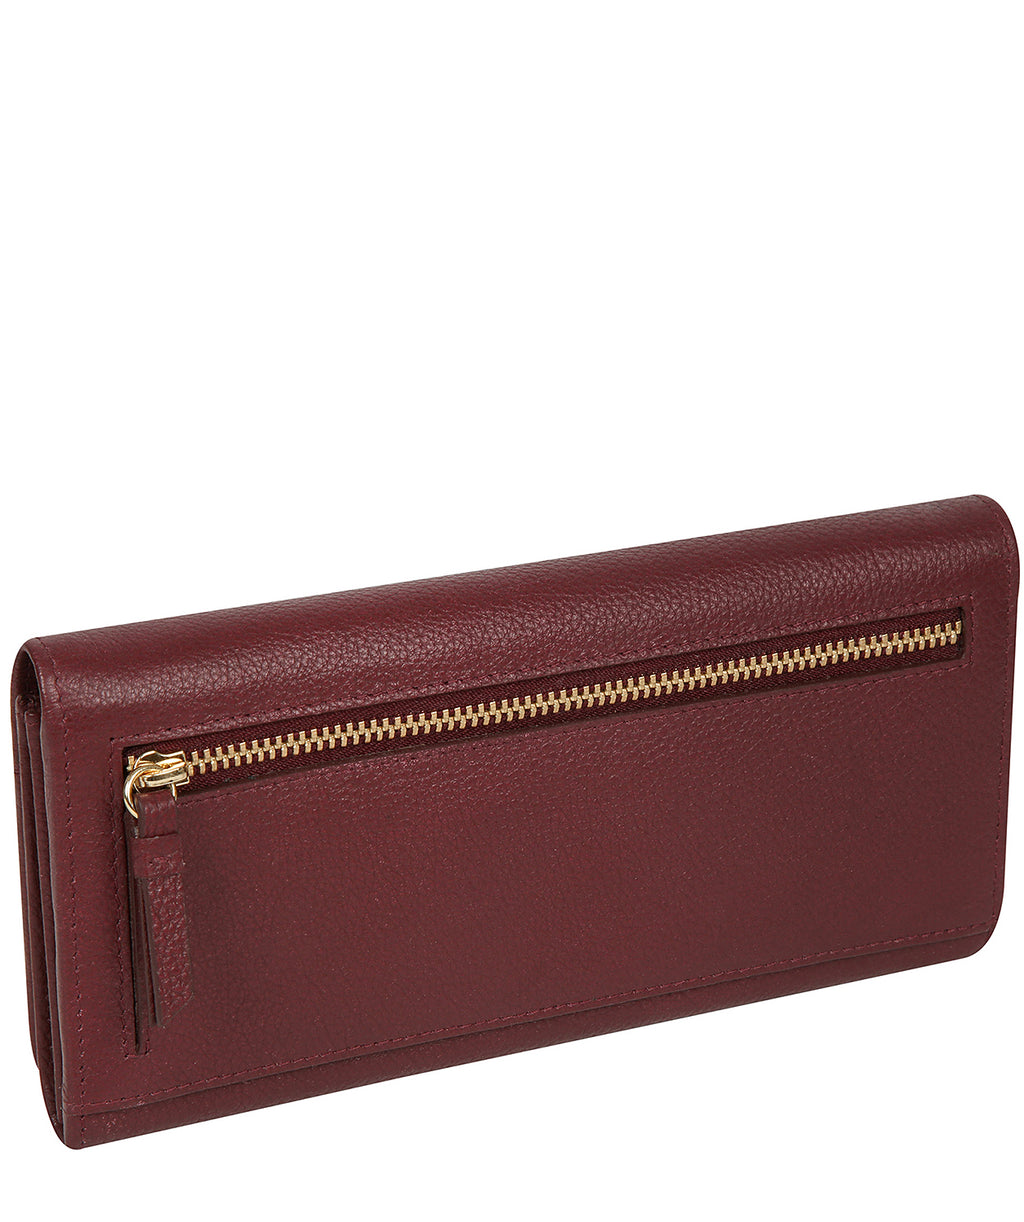 Red Leather Purse 'Izabel' by Pure Luxuries – Pure Luxuries London